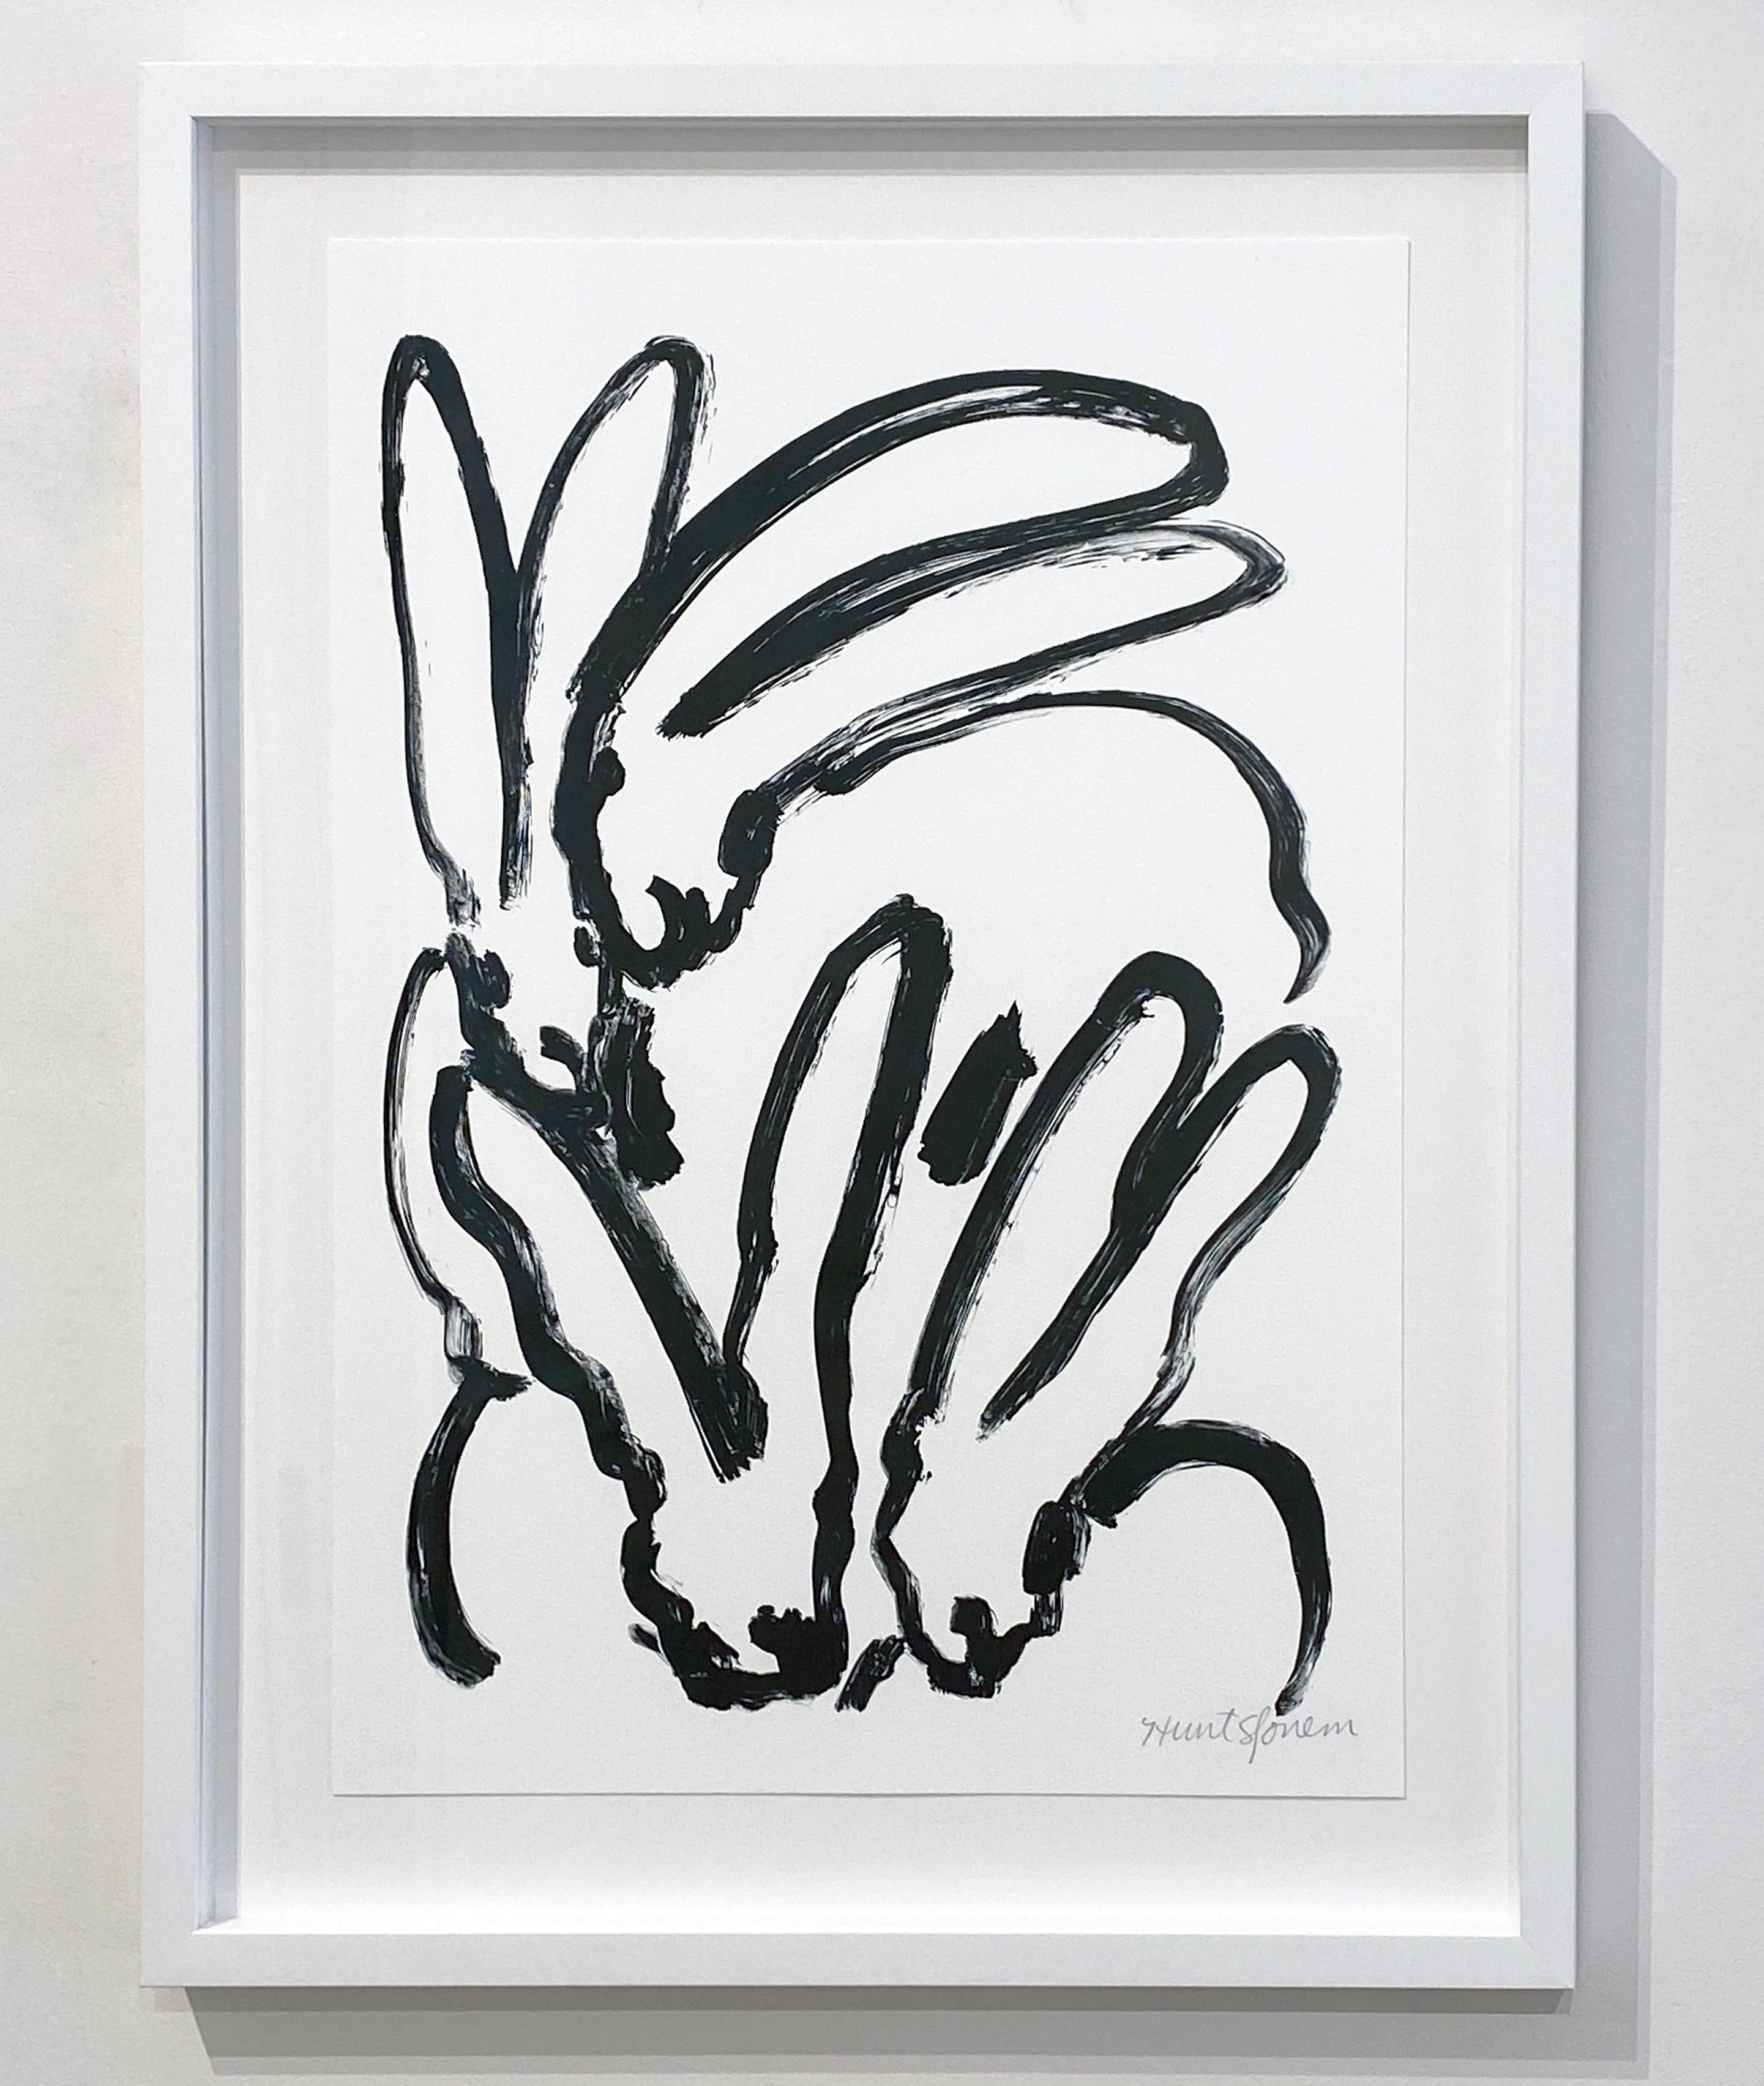 Artist:  Slonem, Hunt
Title:  BW Bunny 2
Series:  Bunnies
Date:  2018
Medium:  Lithograph on Paper
Unframed Dimensions:  24